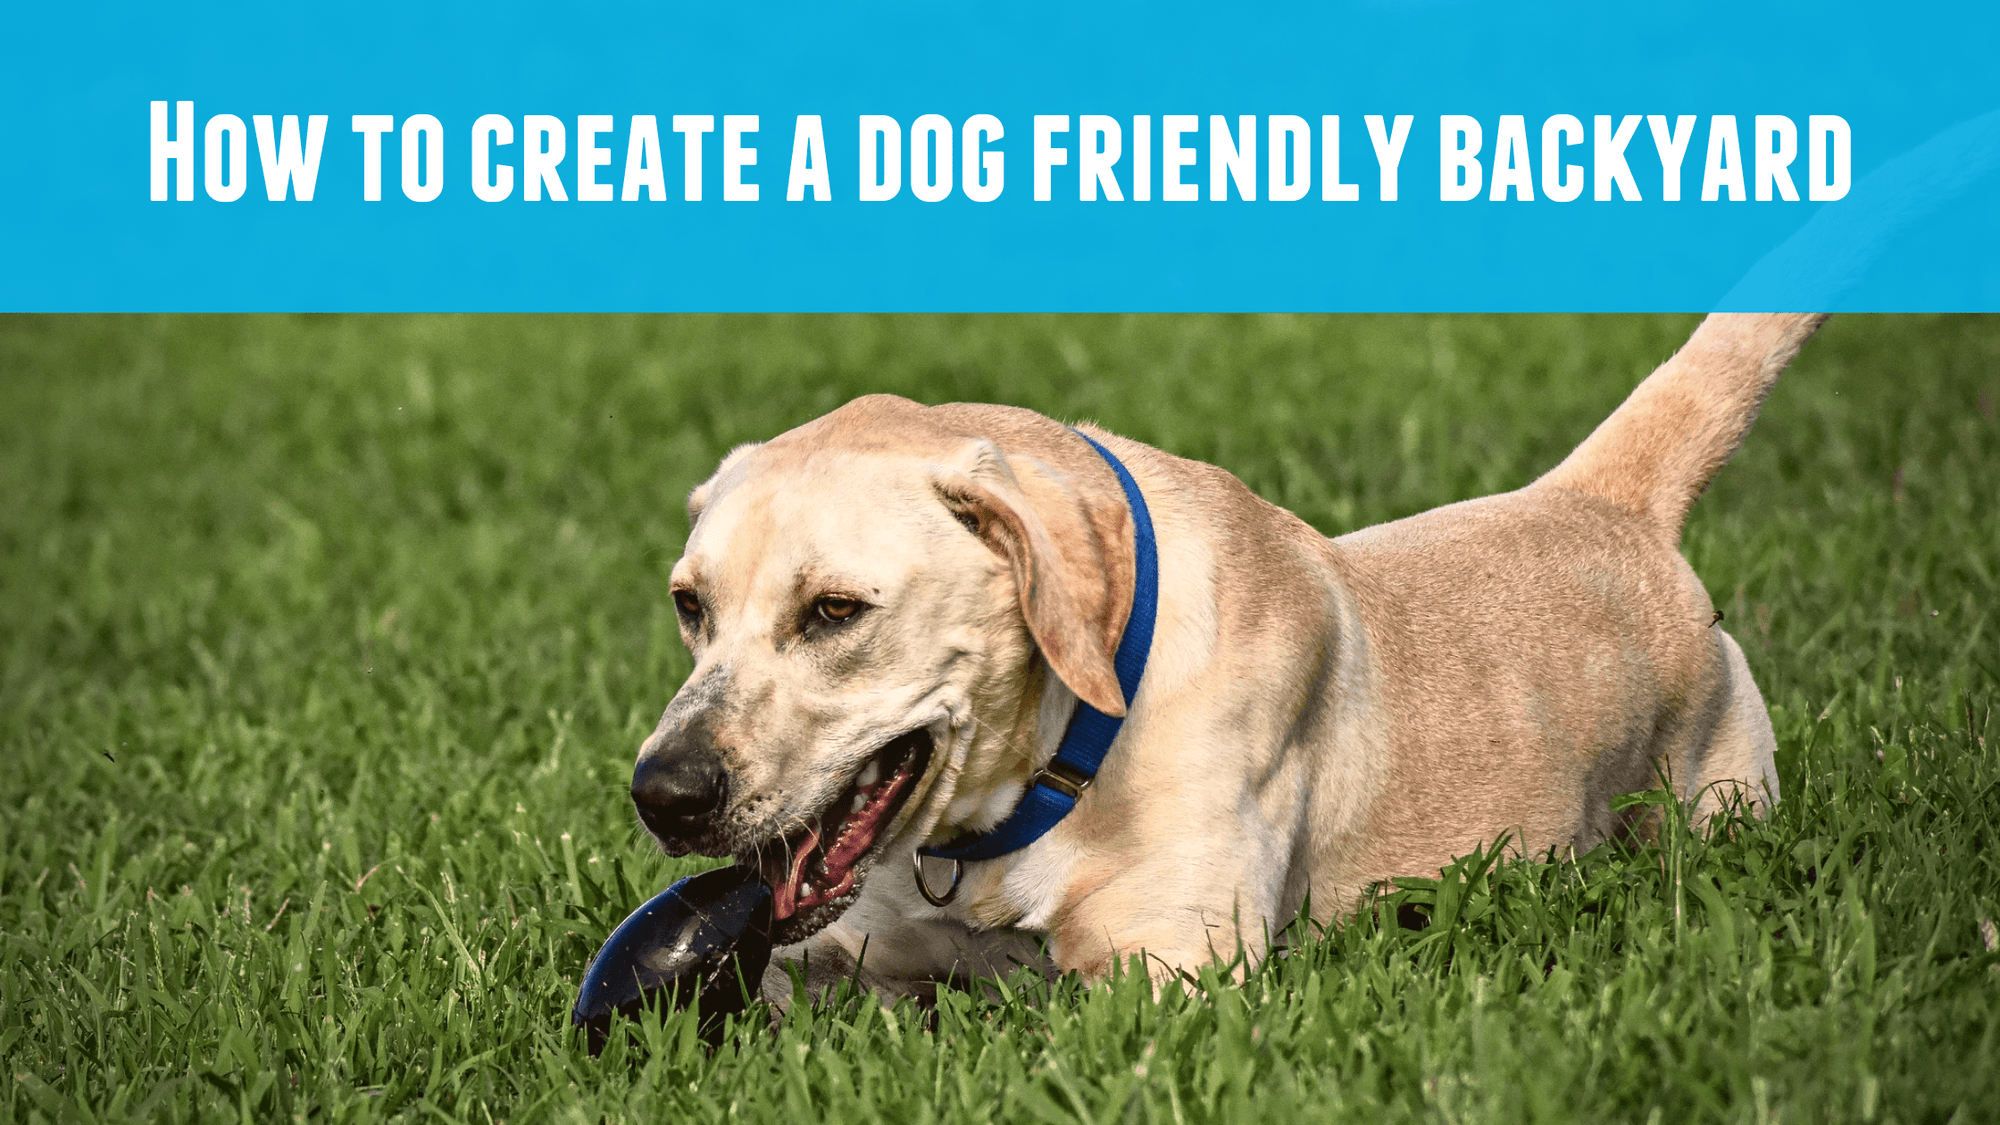 How to Create a Dog Friendly Backyard - Monster K9 Dog Toys